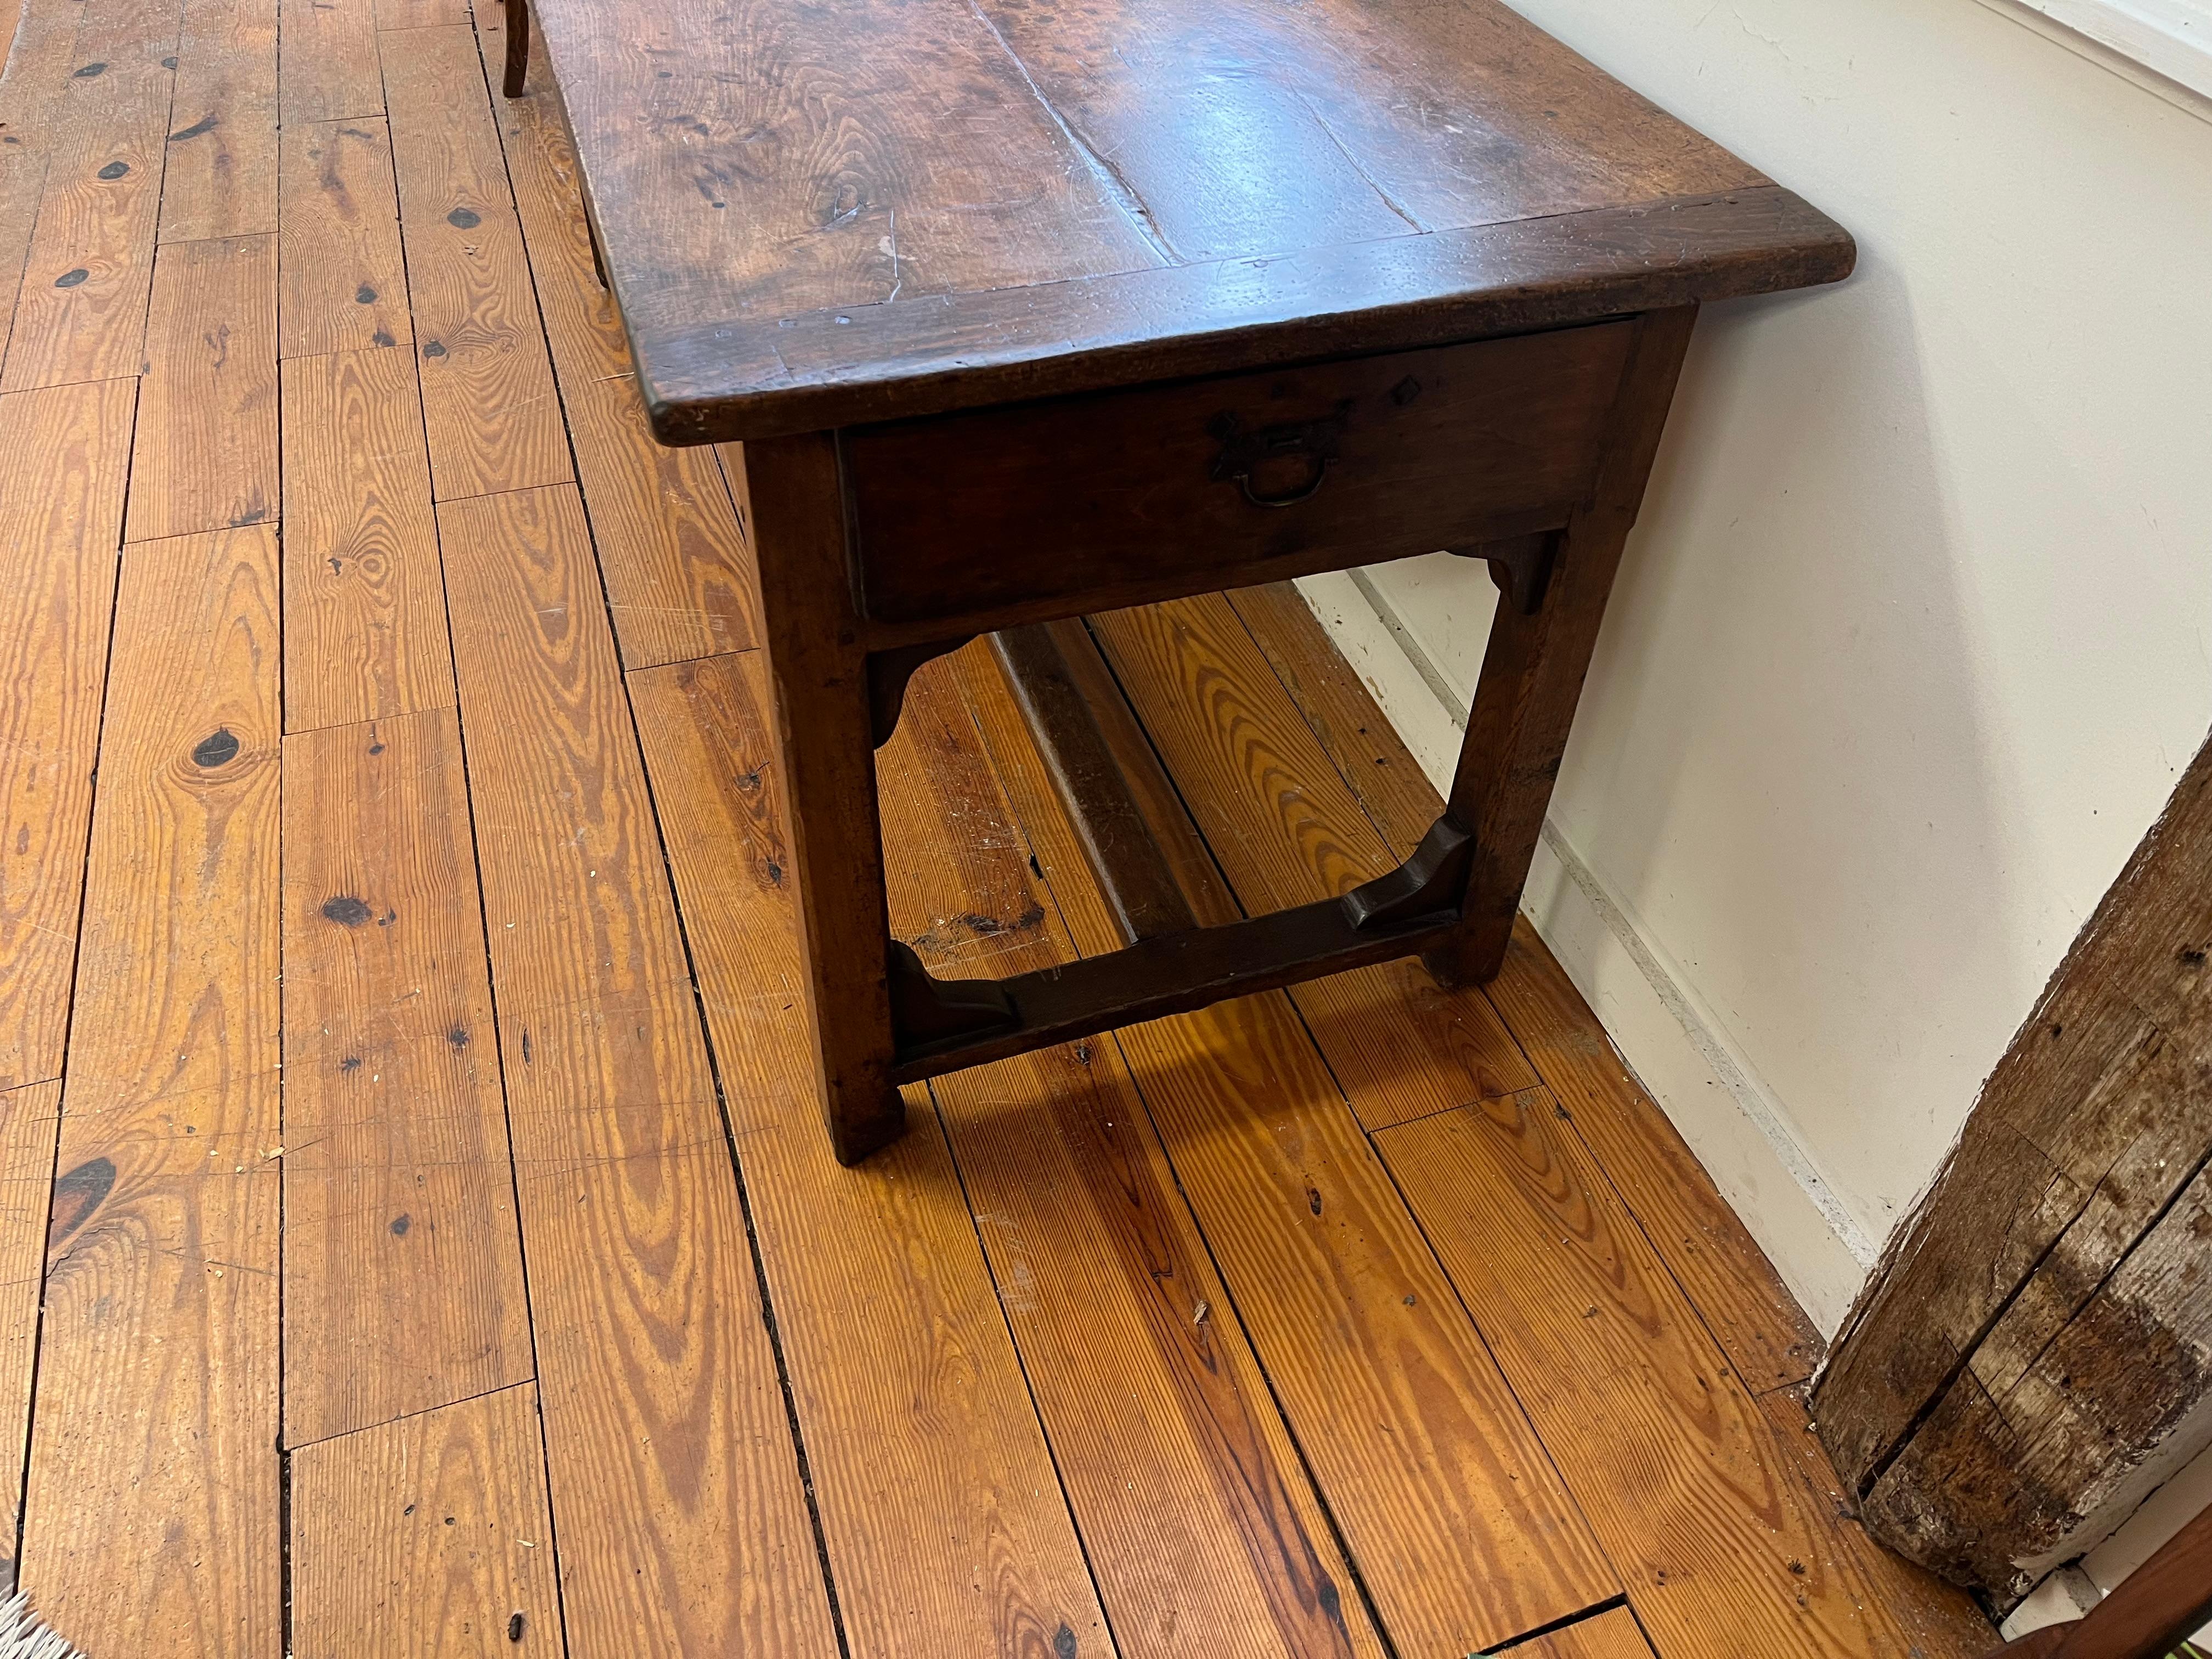 Mid-19th Century French Beech Wood Serving Table with 2 End Drawers